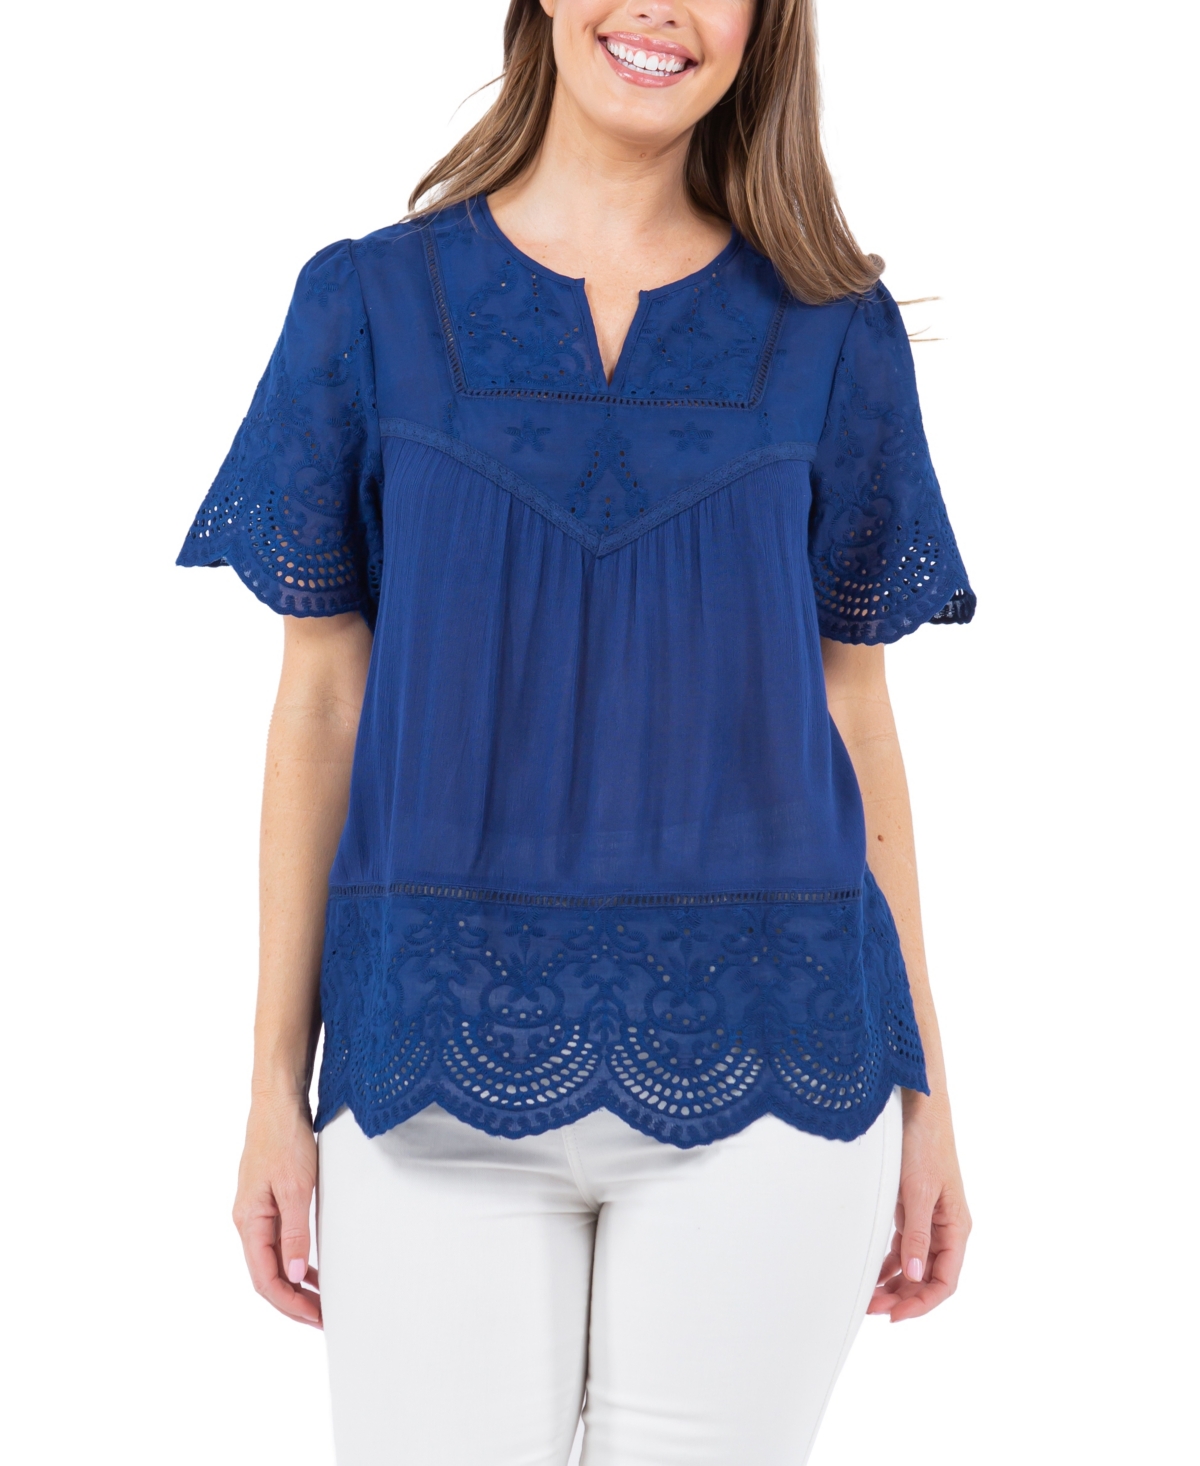 Fever Women's Woven Mixed with Knit Cap Sleeve Top with Eyelet Embroidery